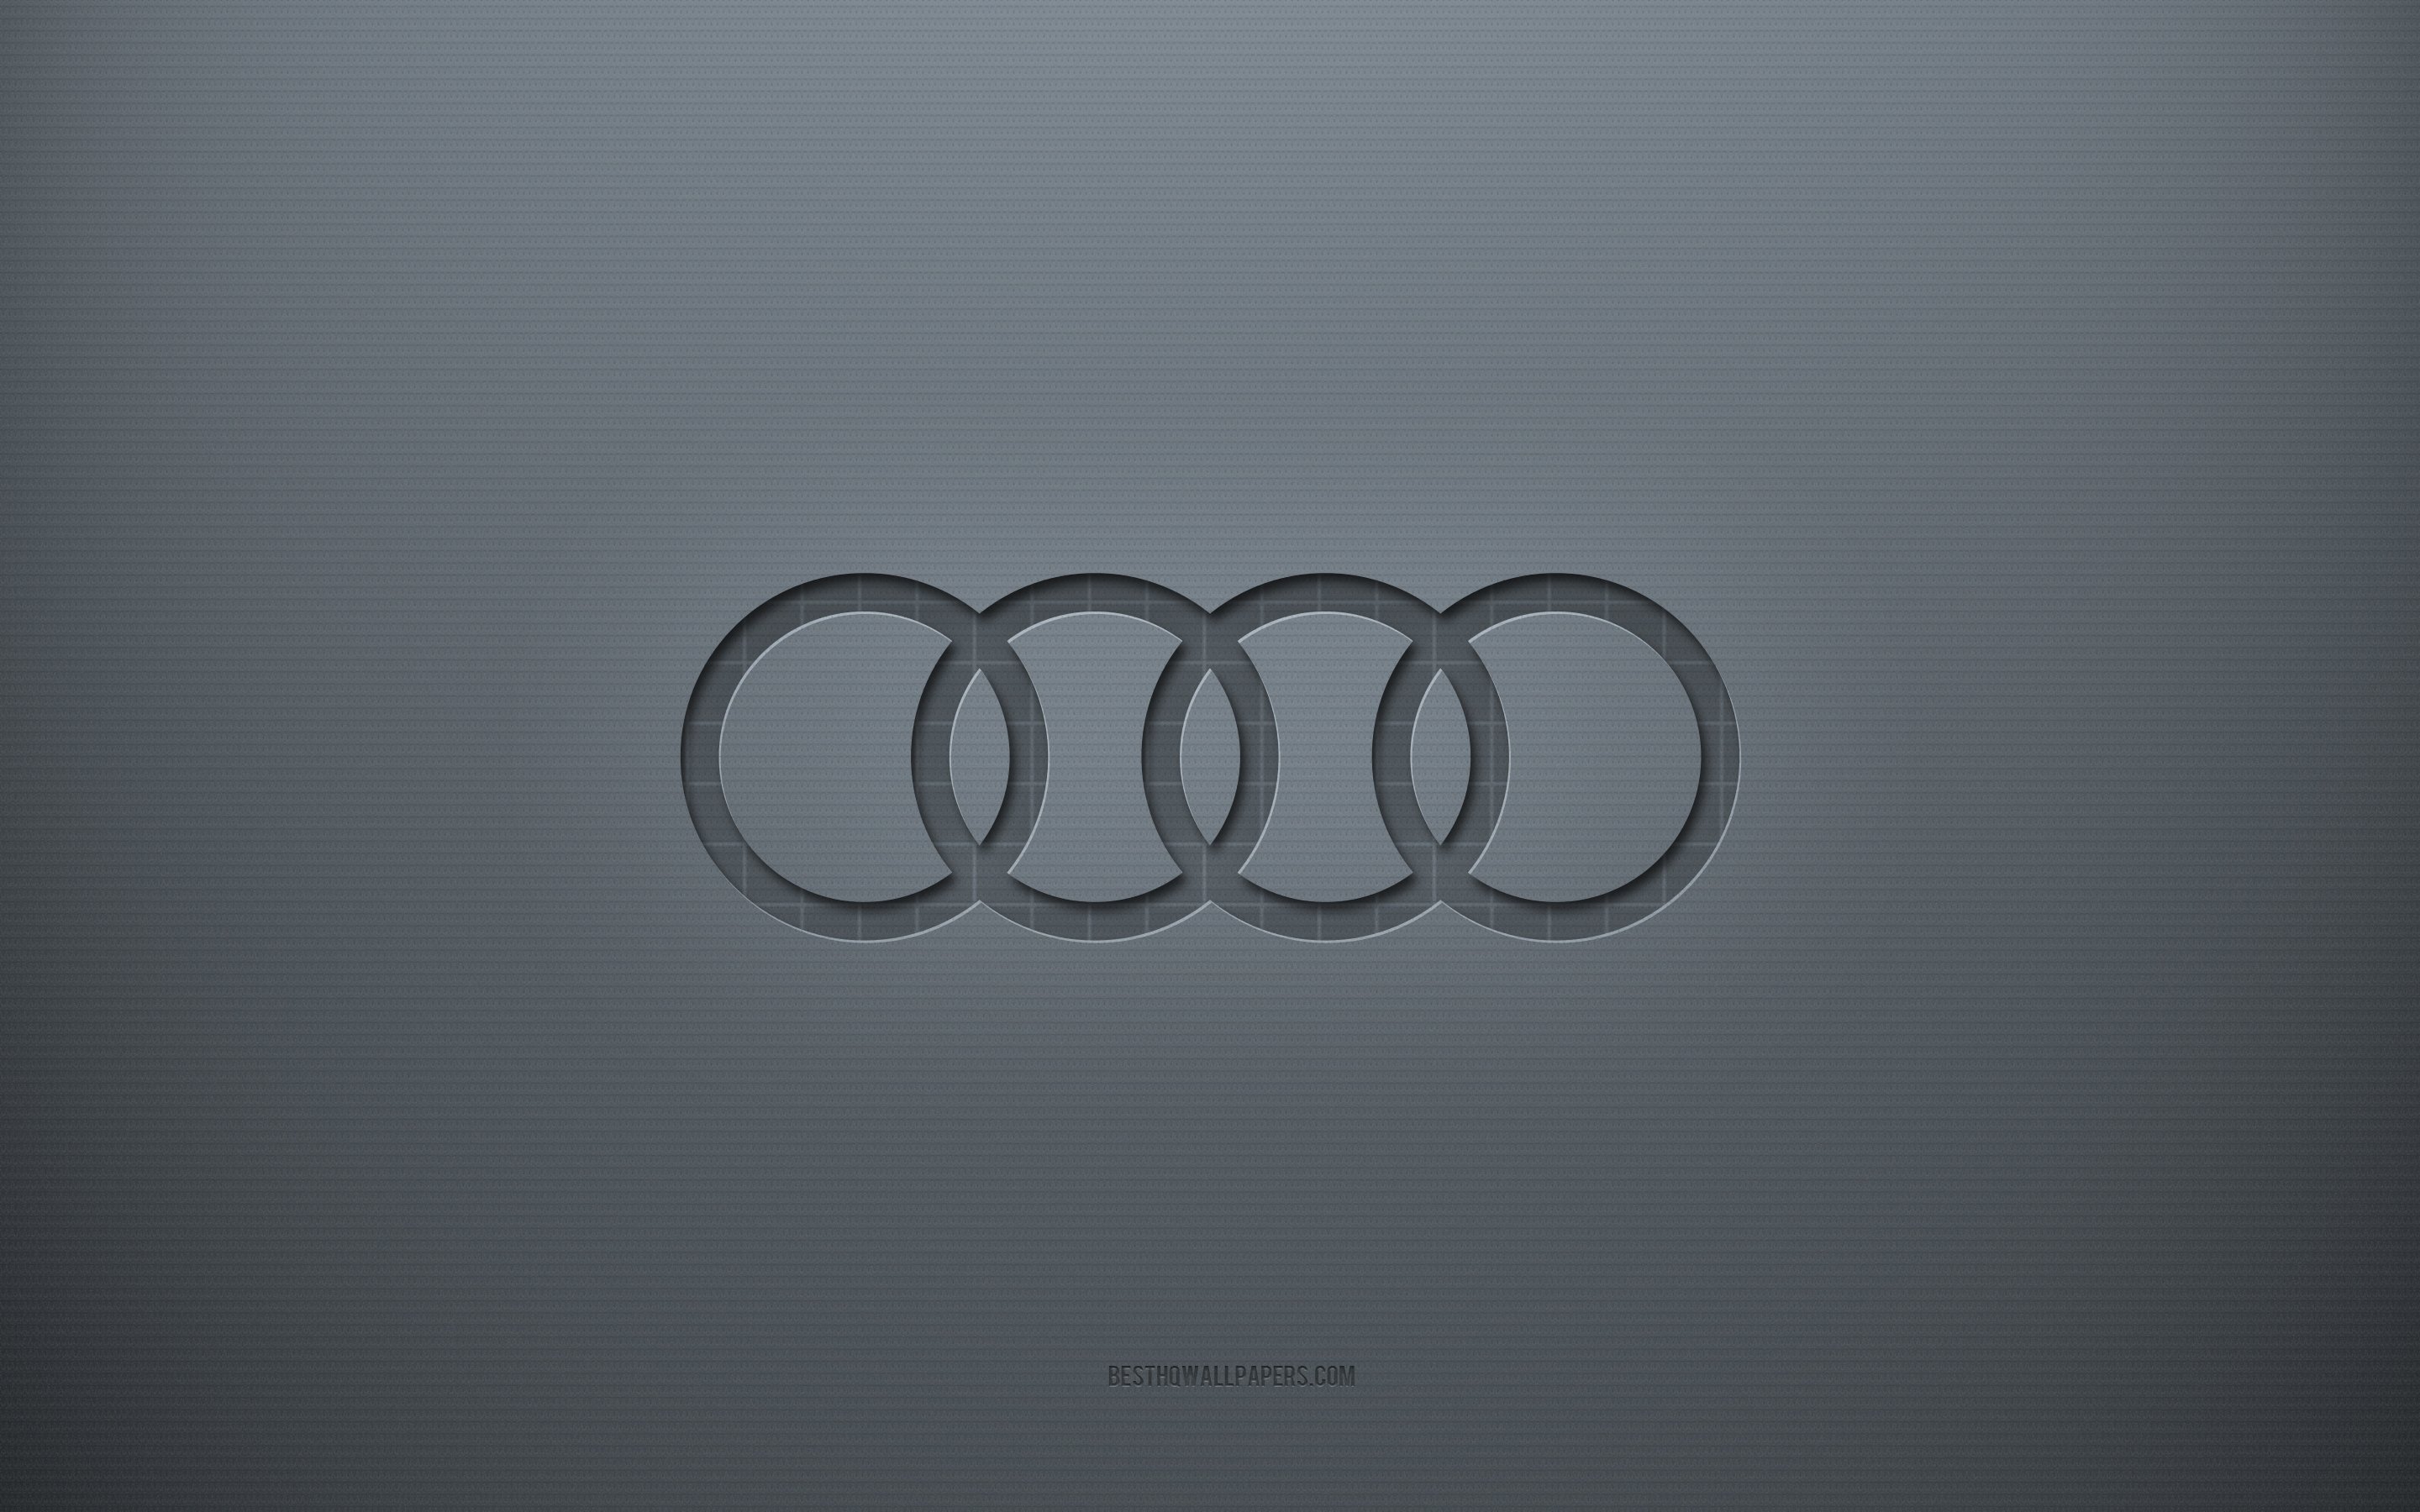 Download wallpaper Audi logo, gray creative background, Audi emblem, gray paper texture, Audi, gray background, Audi 3D logo for desktop with resolution 2880x1800. High Quality HD picture wallpaper